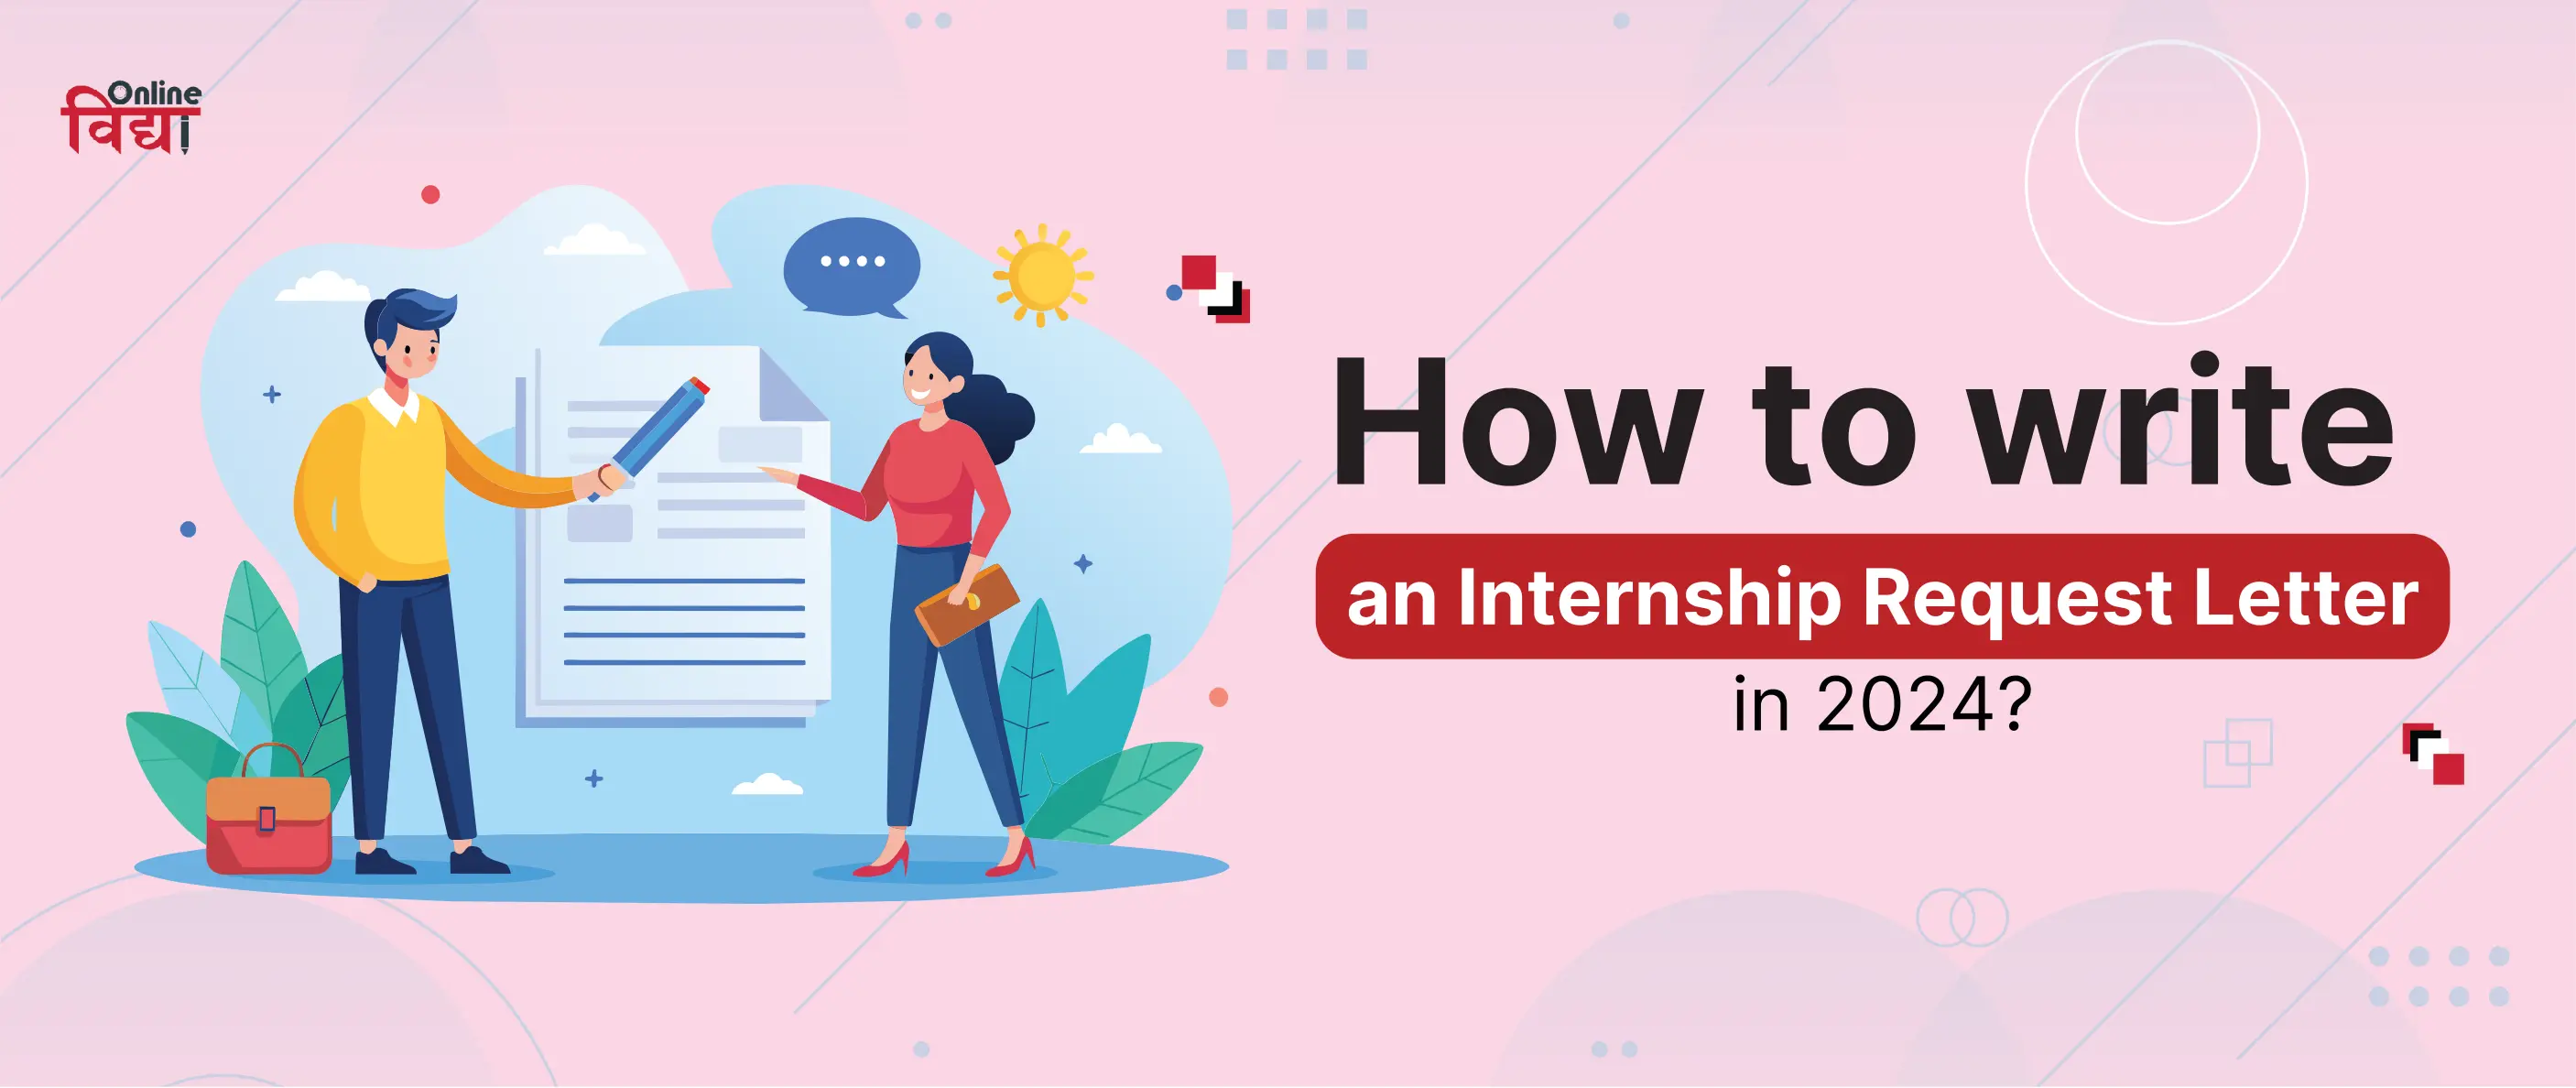 How to write an Internship Request Letter in 2024?